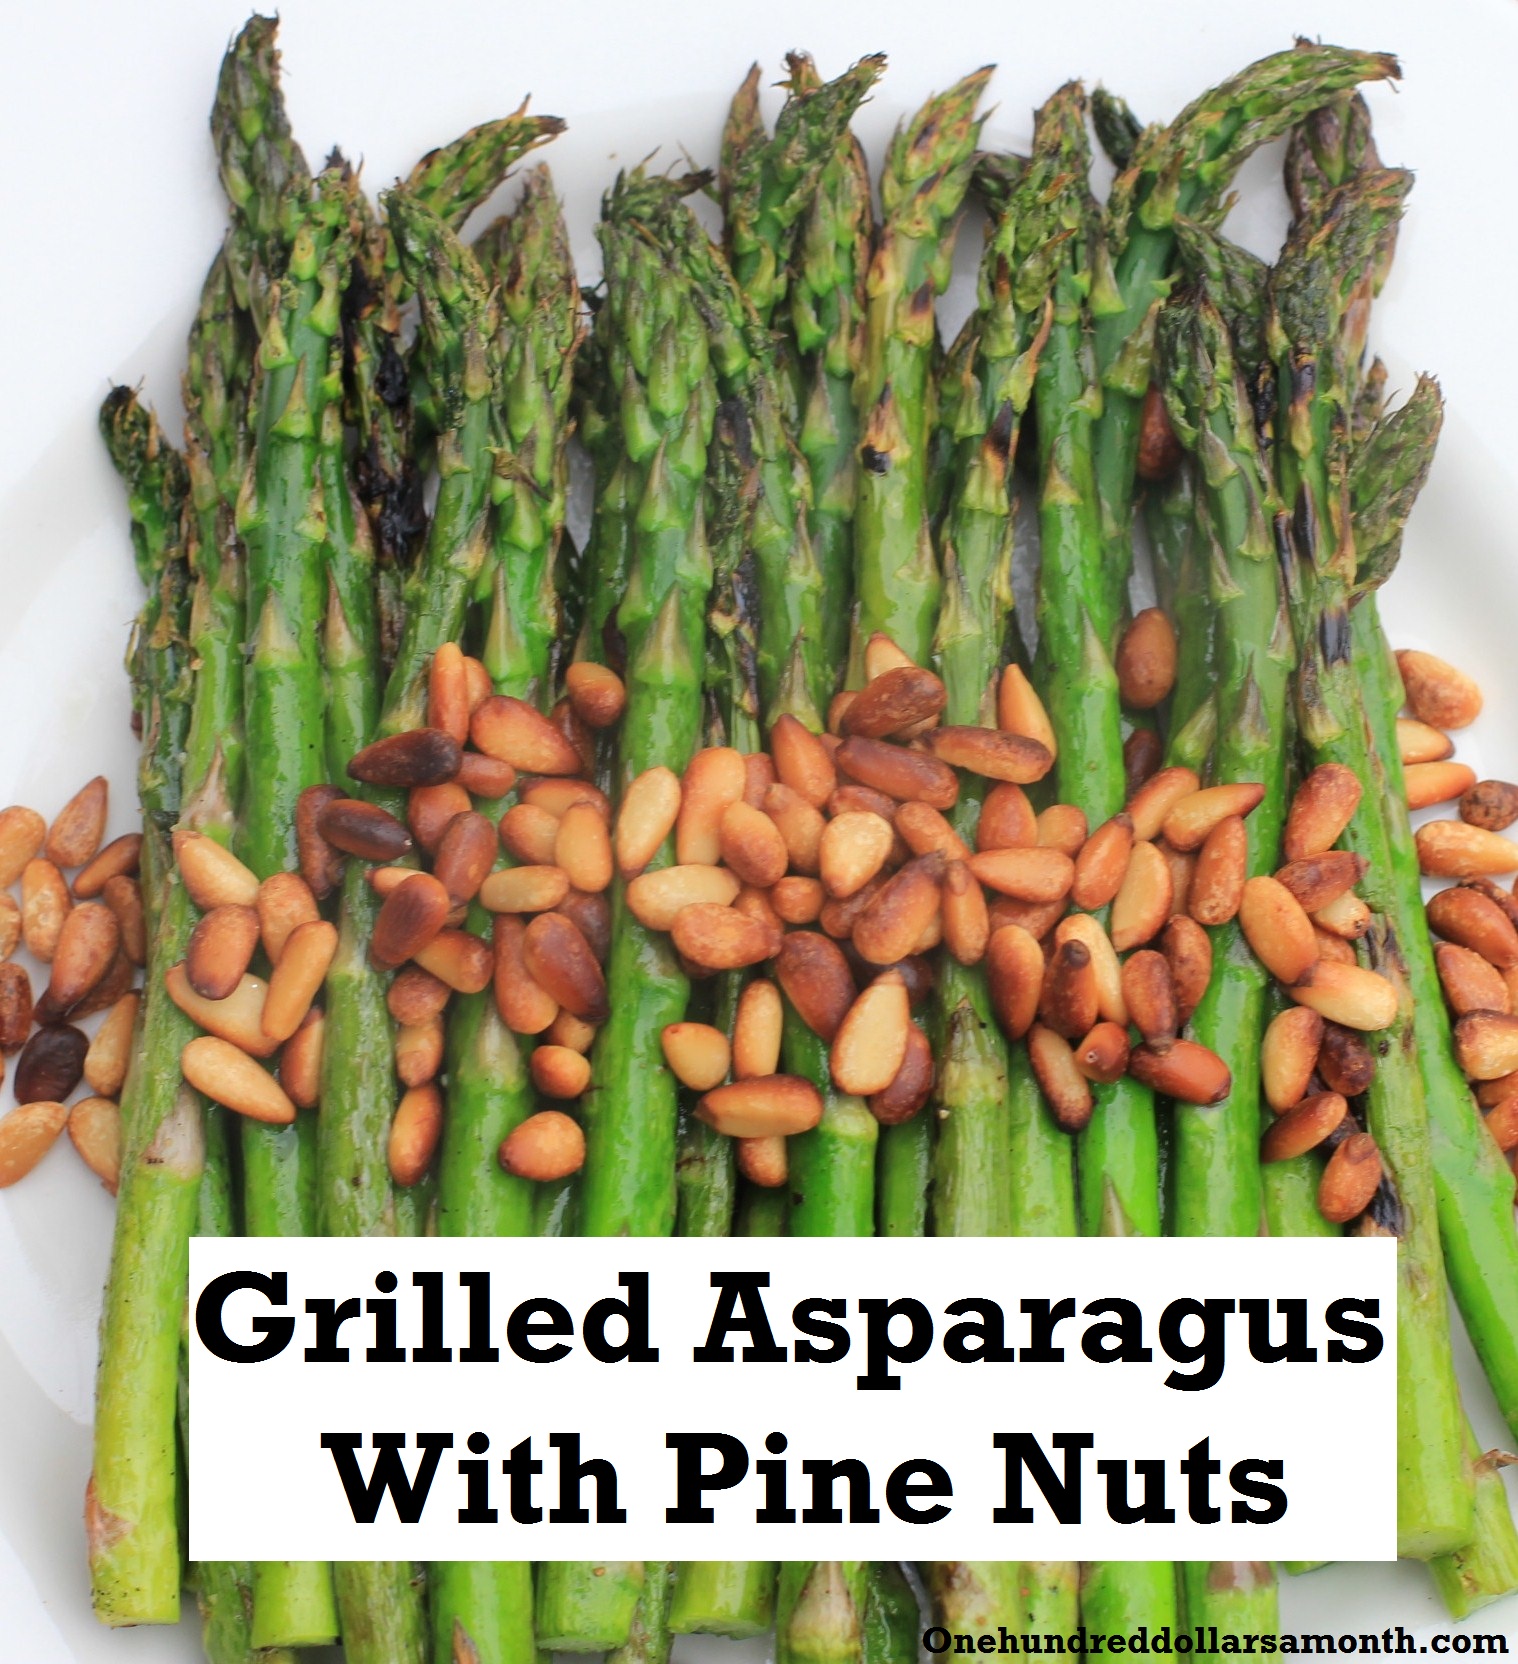 Recipe: Grilled Asparagus With Pine Nuts